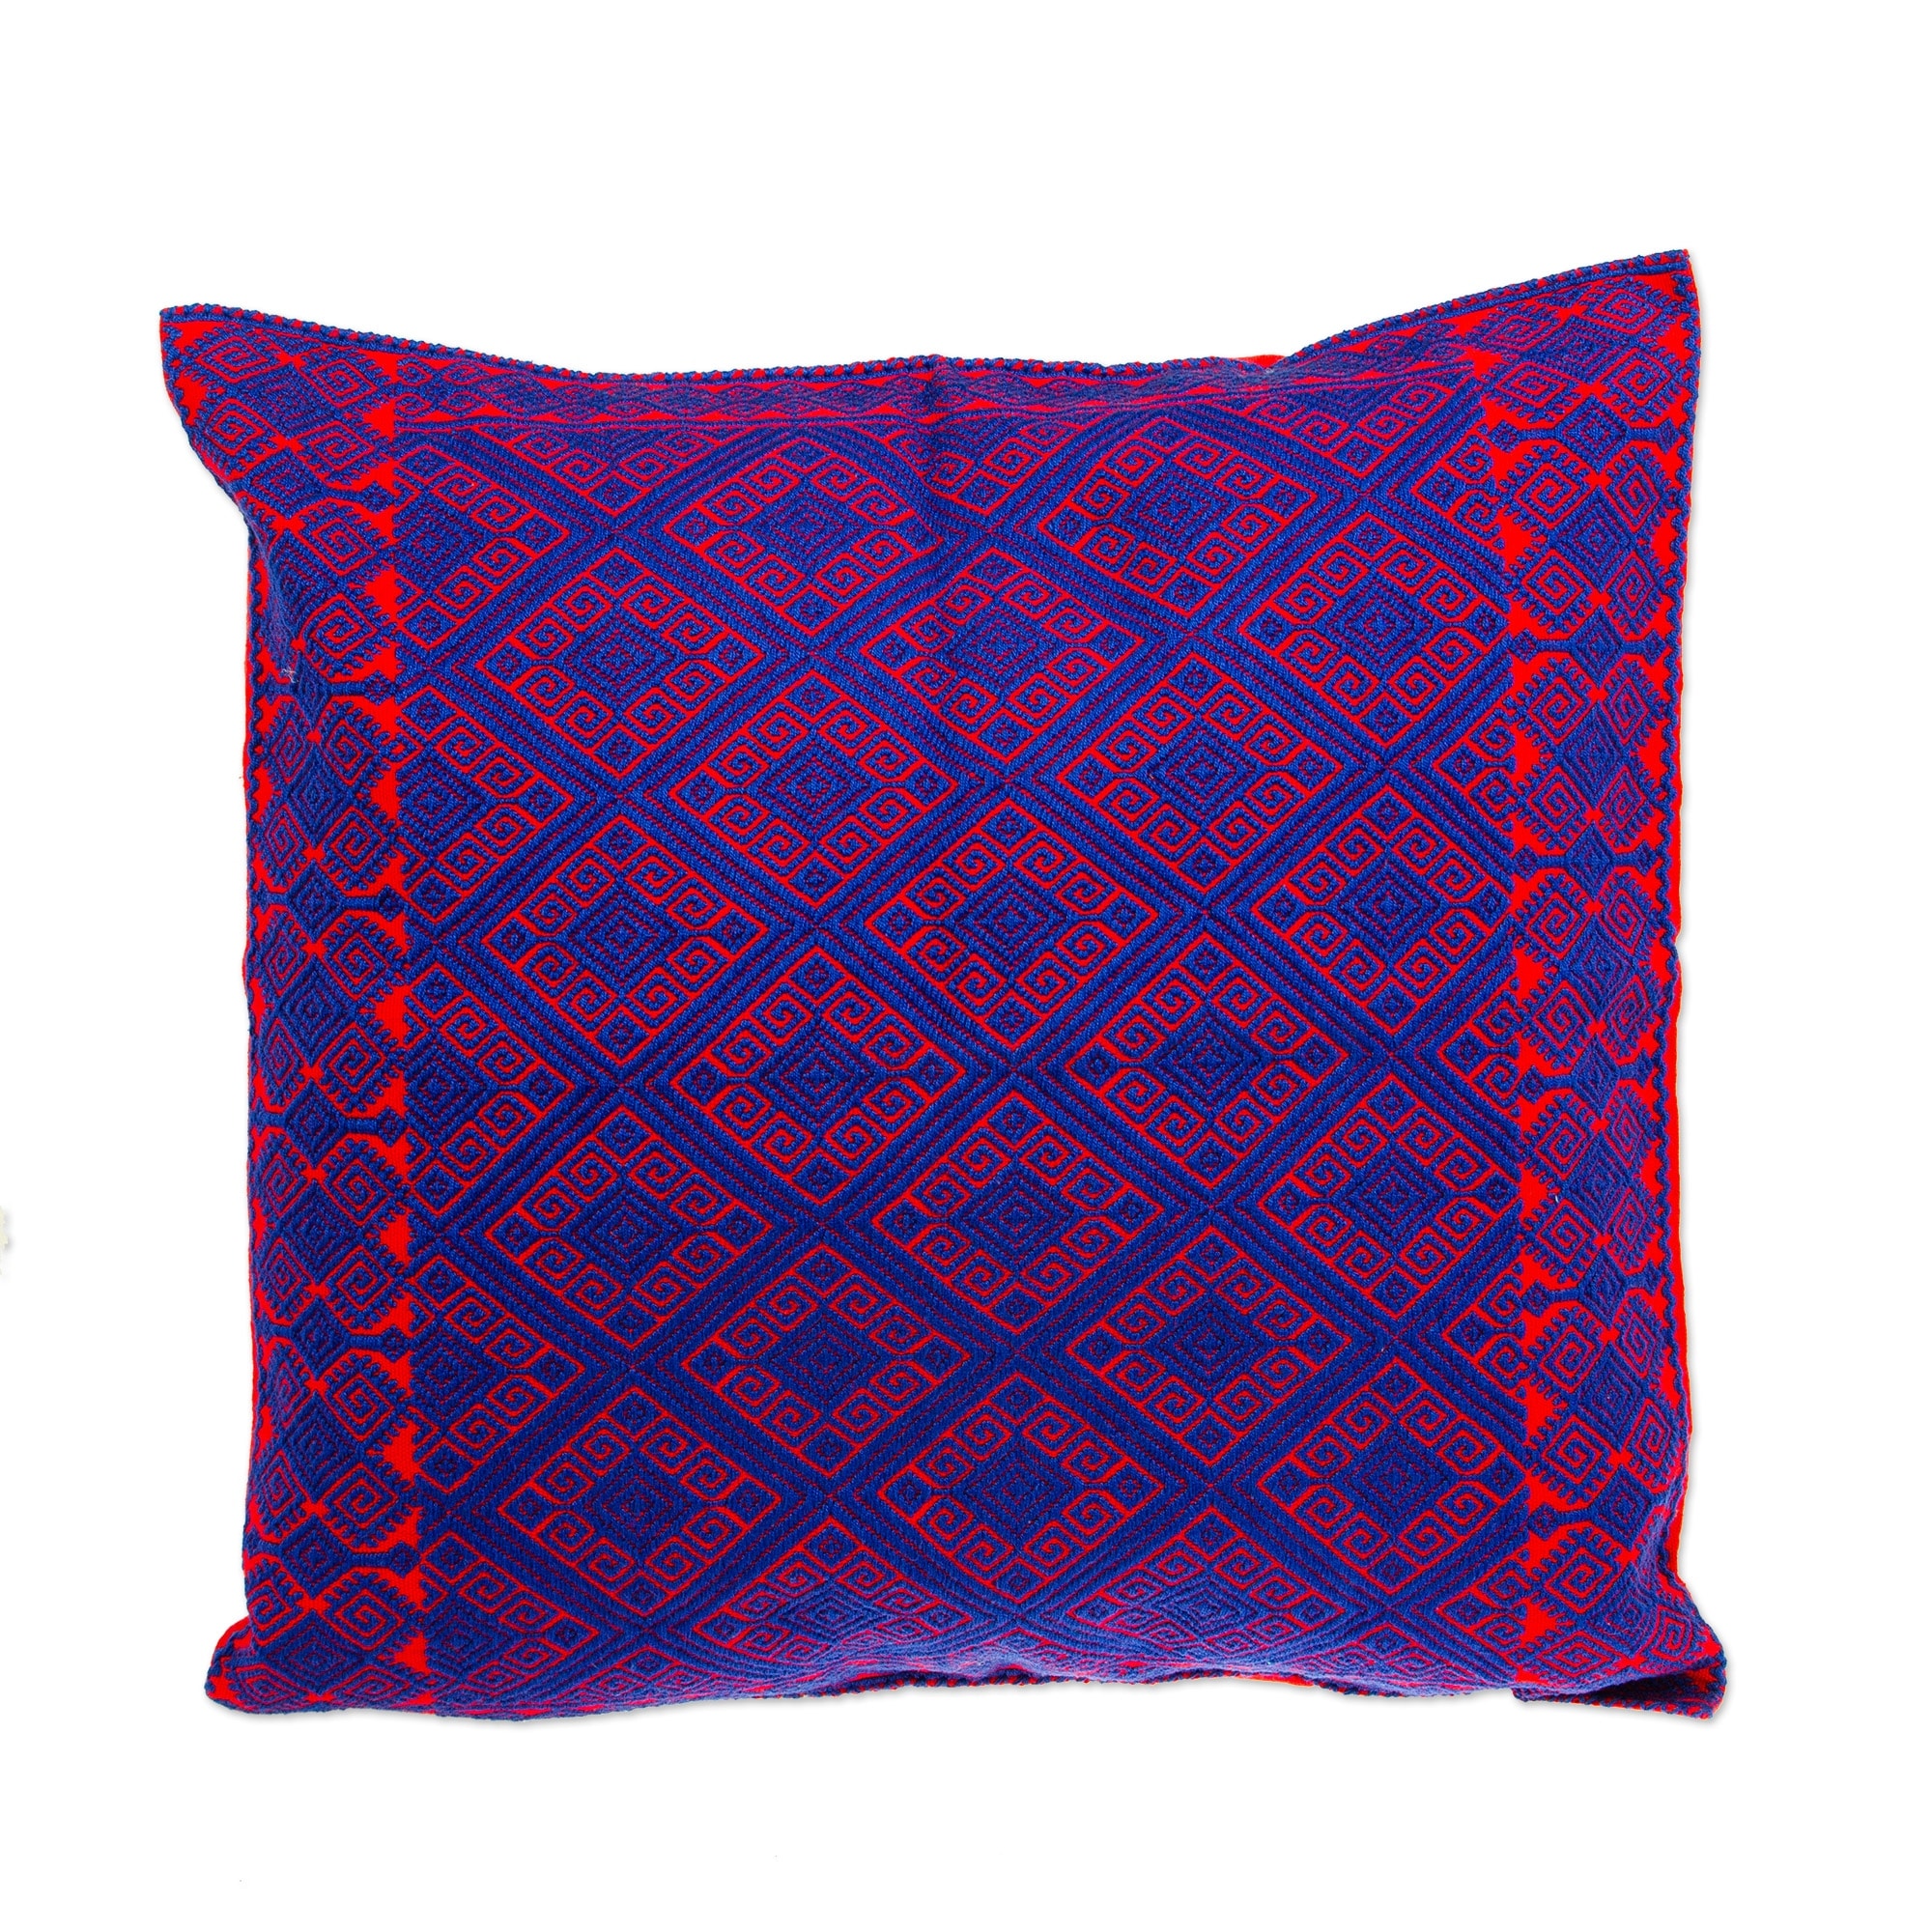 https://ak1.ostkcdn.com/images/products/is/images/direct/1febe7a16b5b0c1a874c977ca06b213da9cff9d3/Novica-Handmade-Red-With-Blue-Cotton-Cushion-Cover.jpg